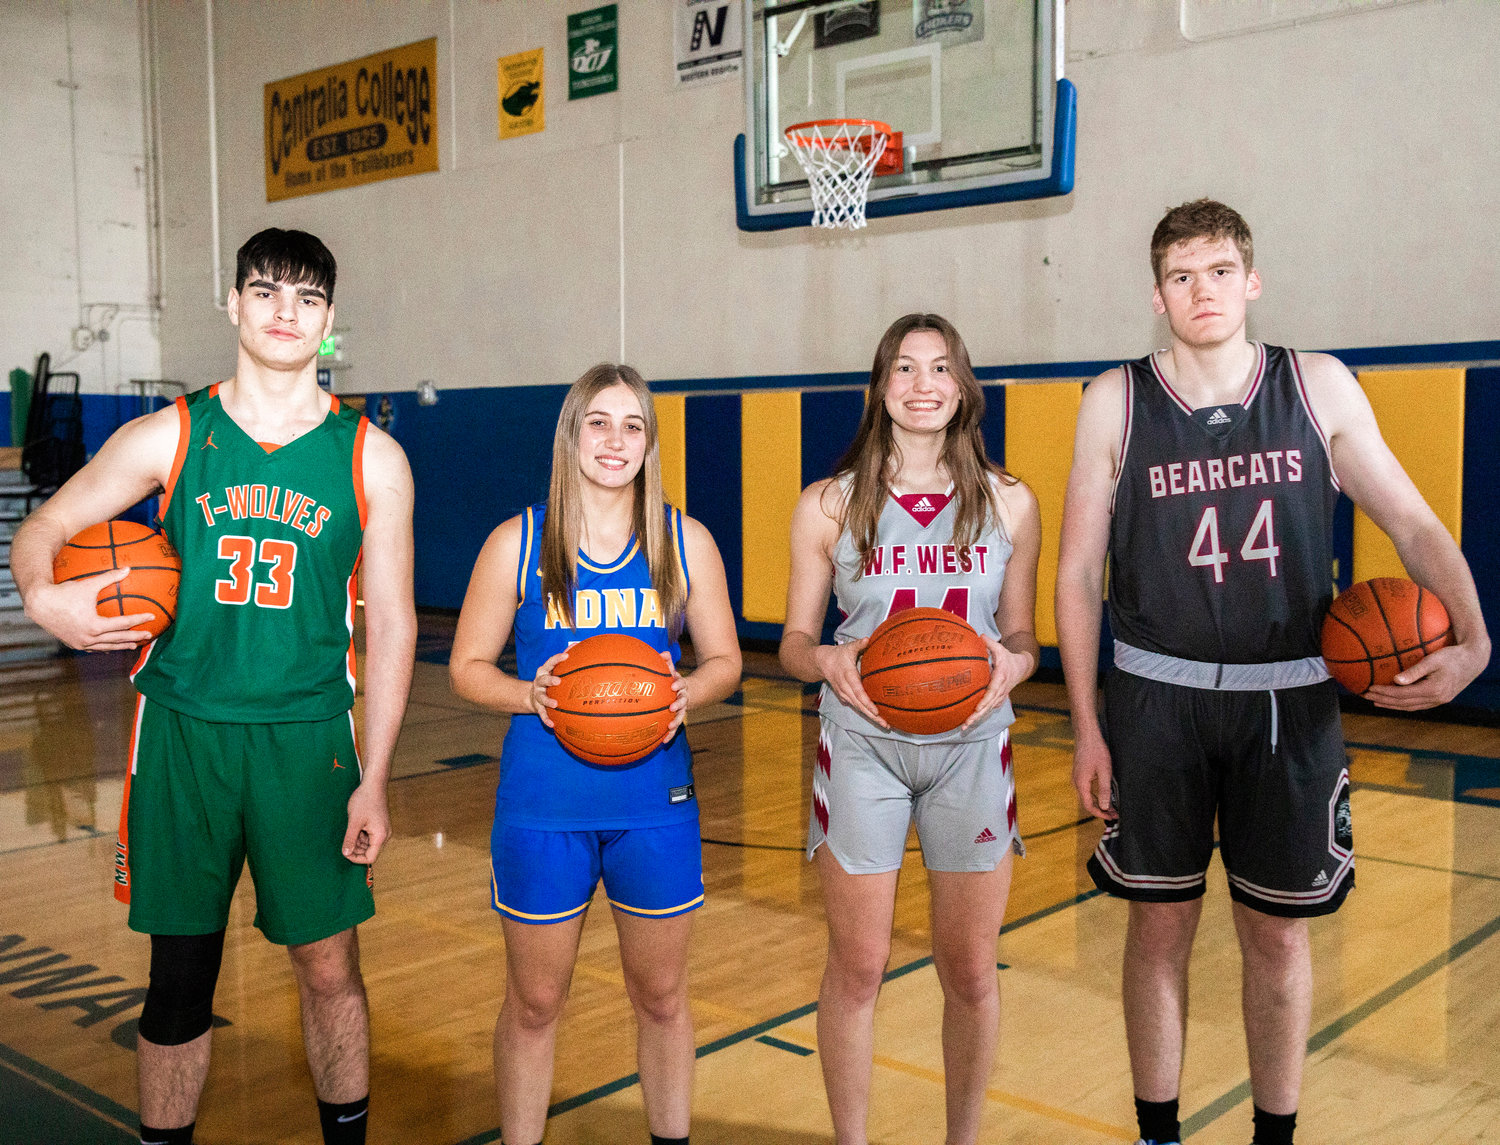 From left, MWP’s Josh Salguero, Adna’s Karlee VonMoos, and W.F. West’s Juila and Soren Dalan hold basketballs and pose for a photo in the Centralia College gymnasium on Tuesday.